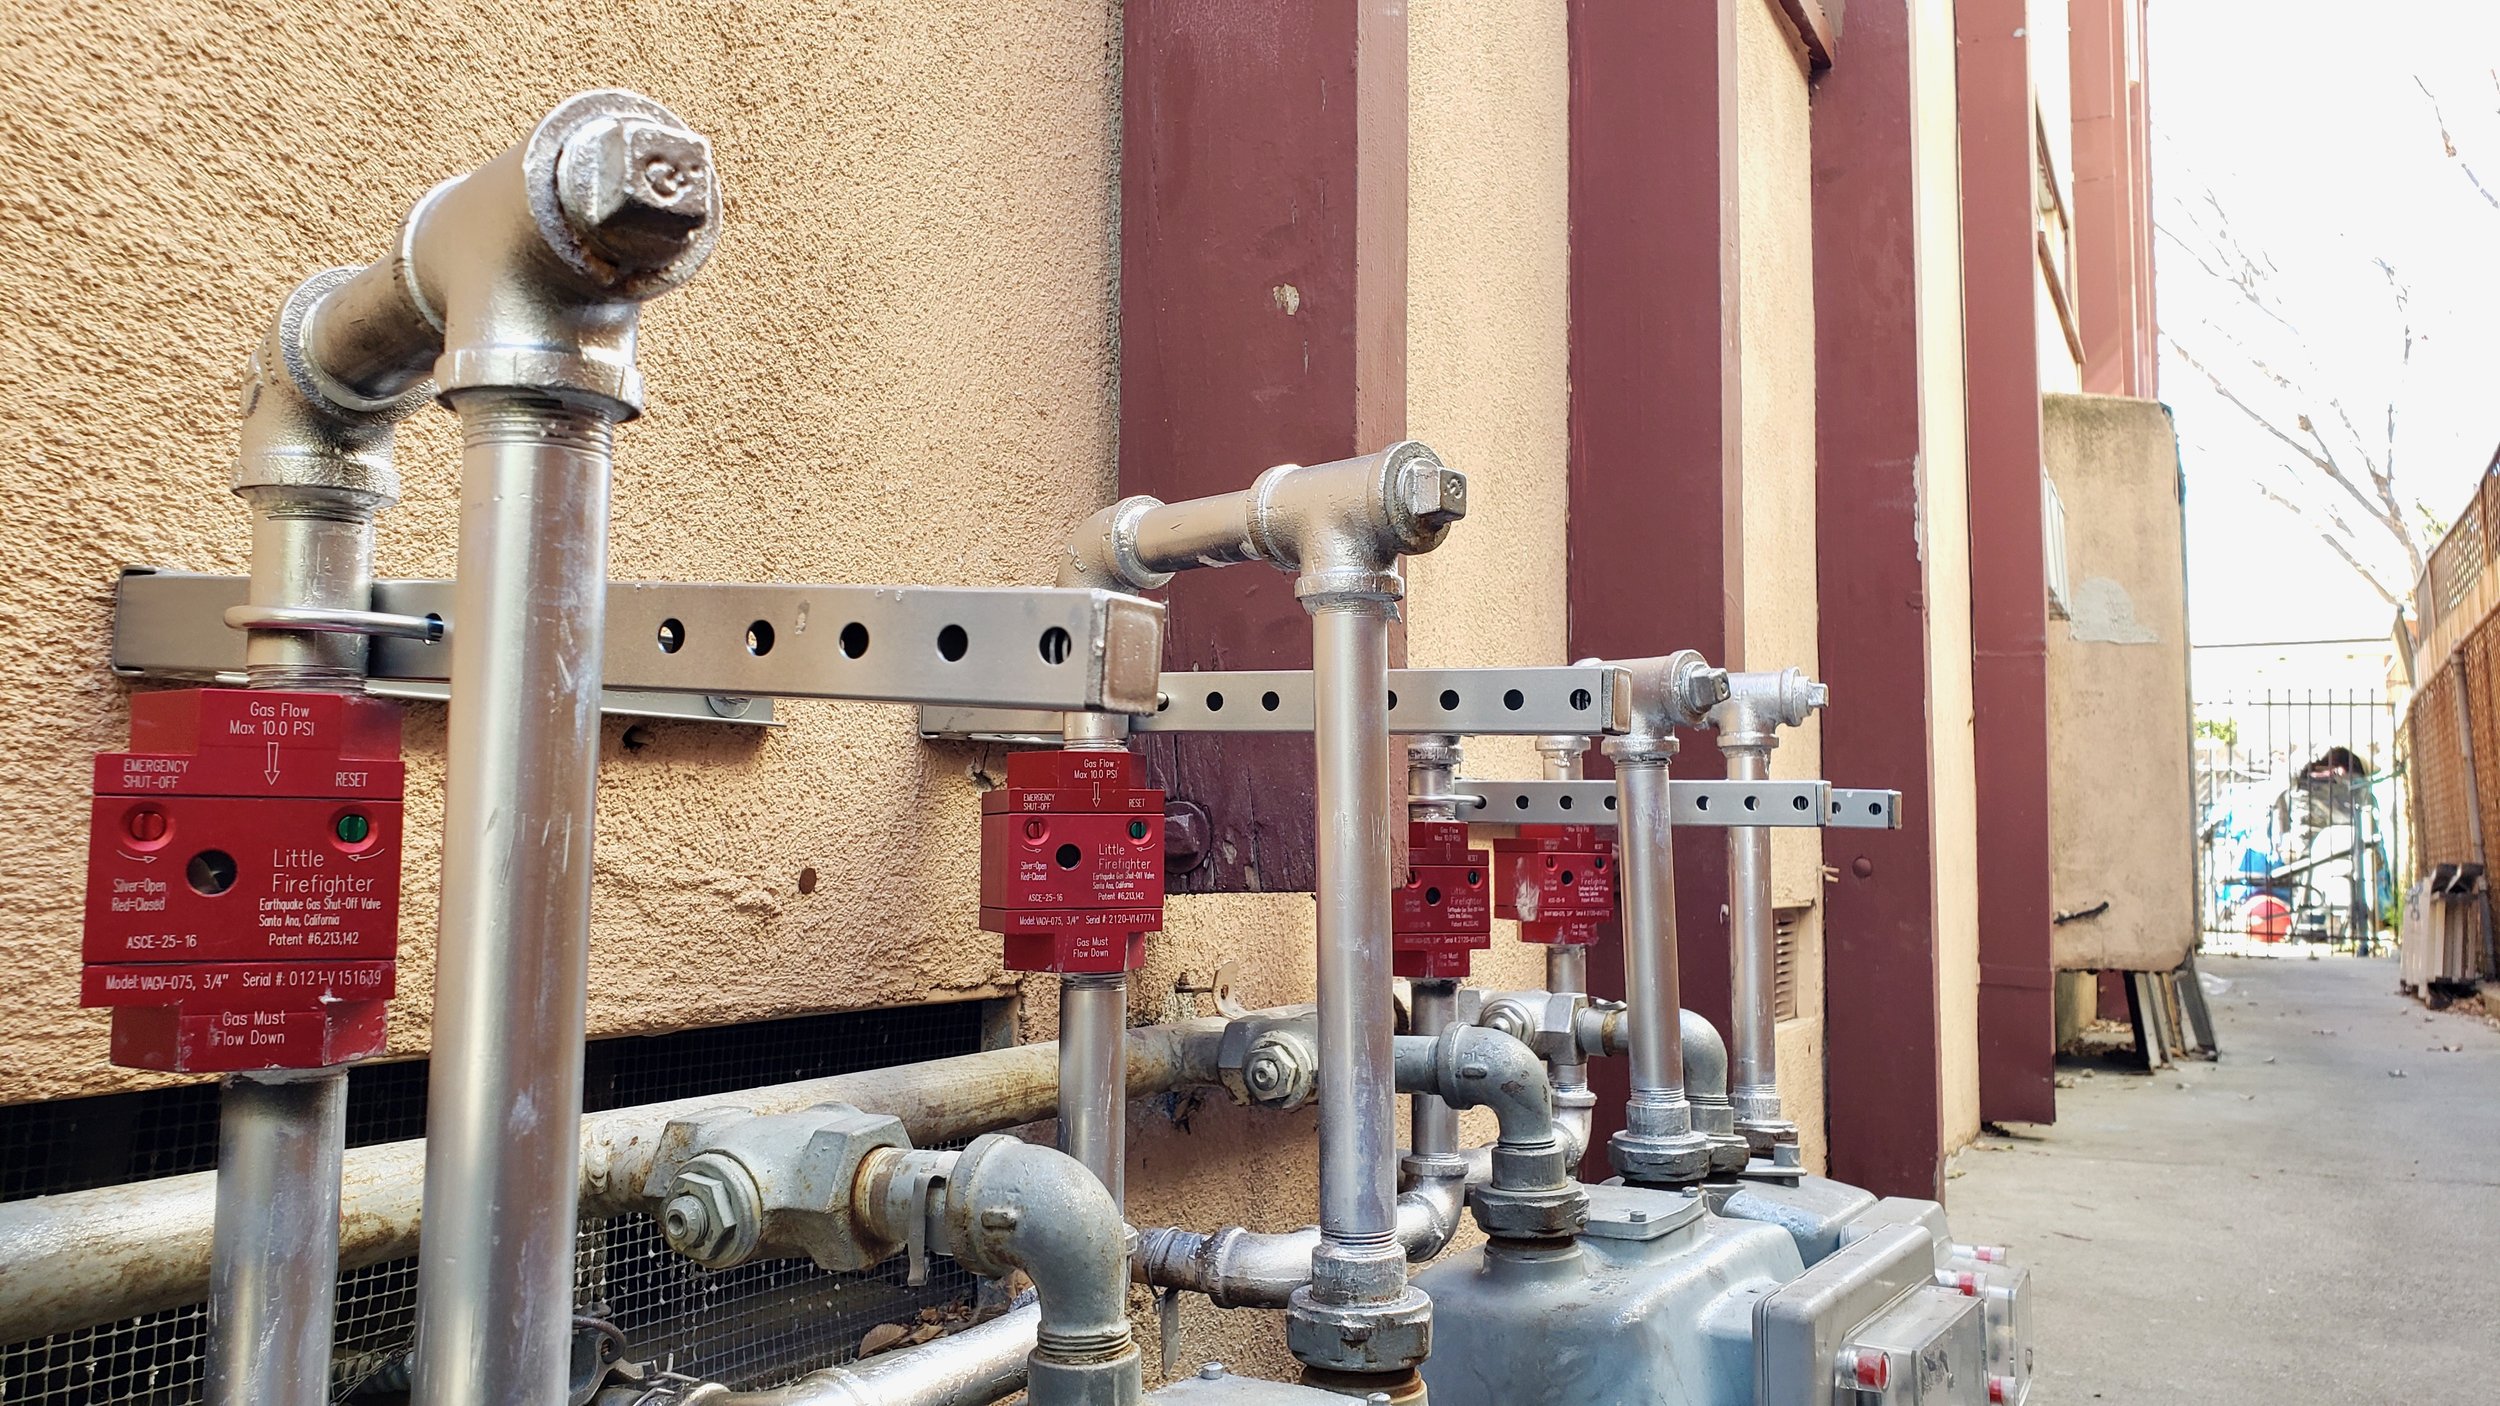 Gas meters and emergency shutoff valves on a building's exterior wall.